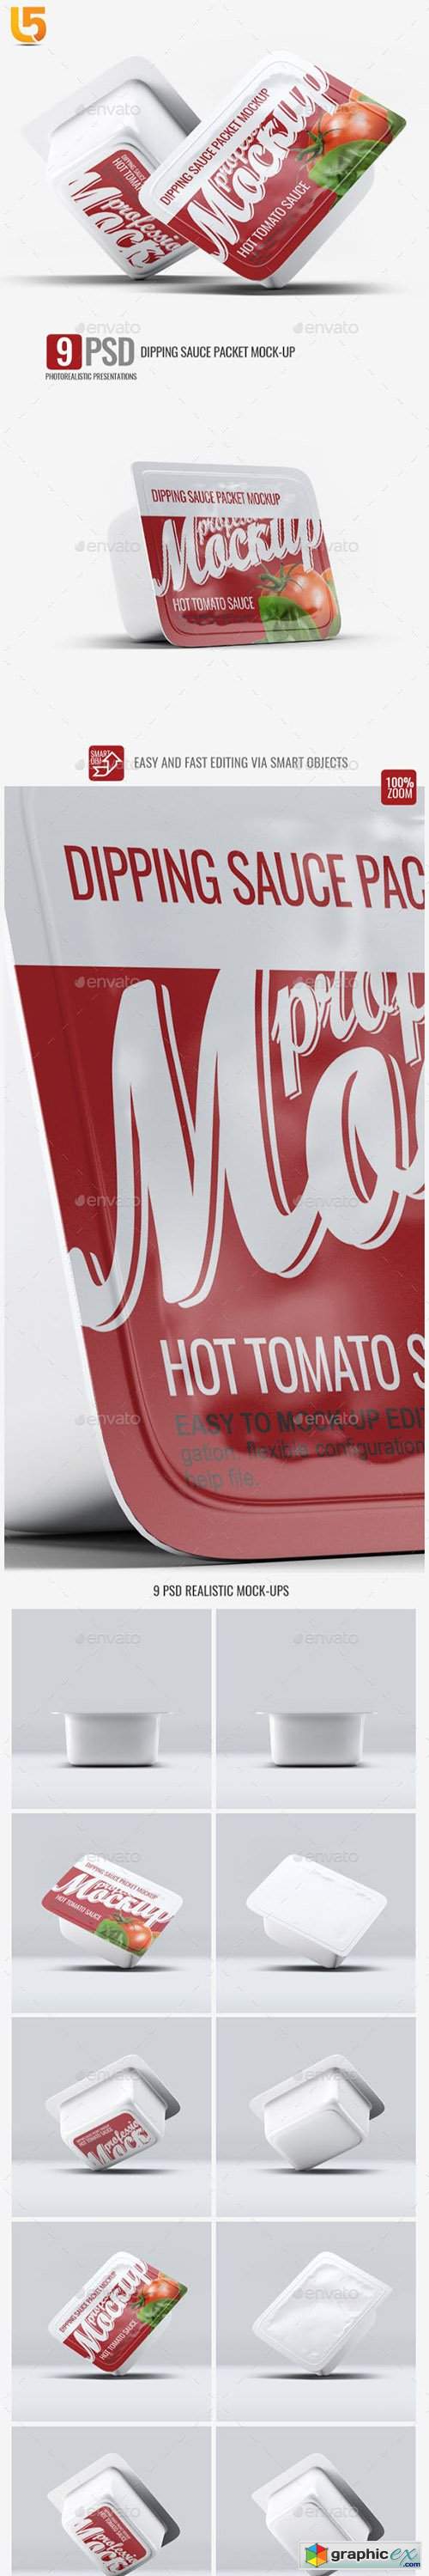 Dipping Sauce Packet Mock-Up